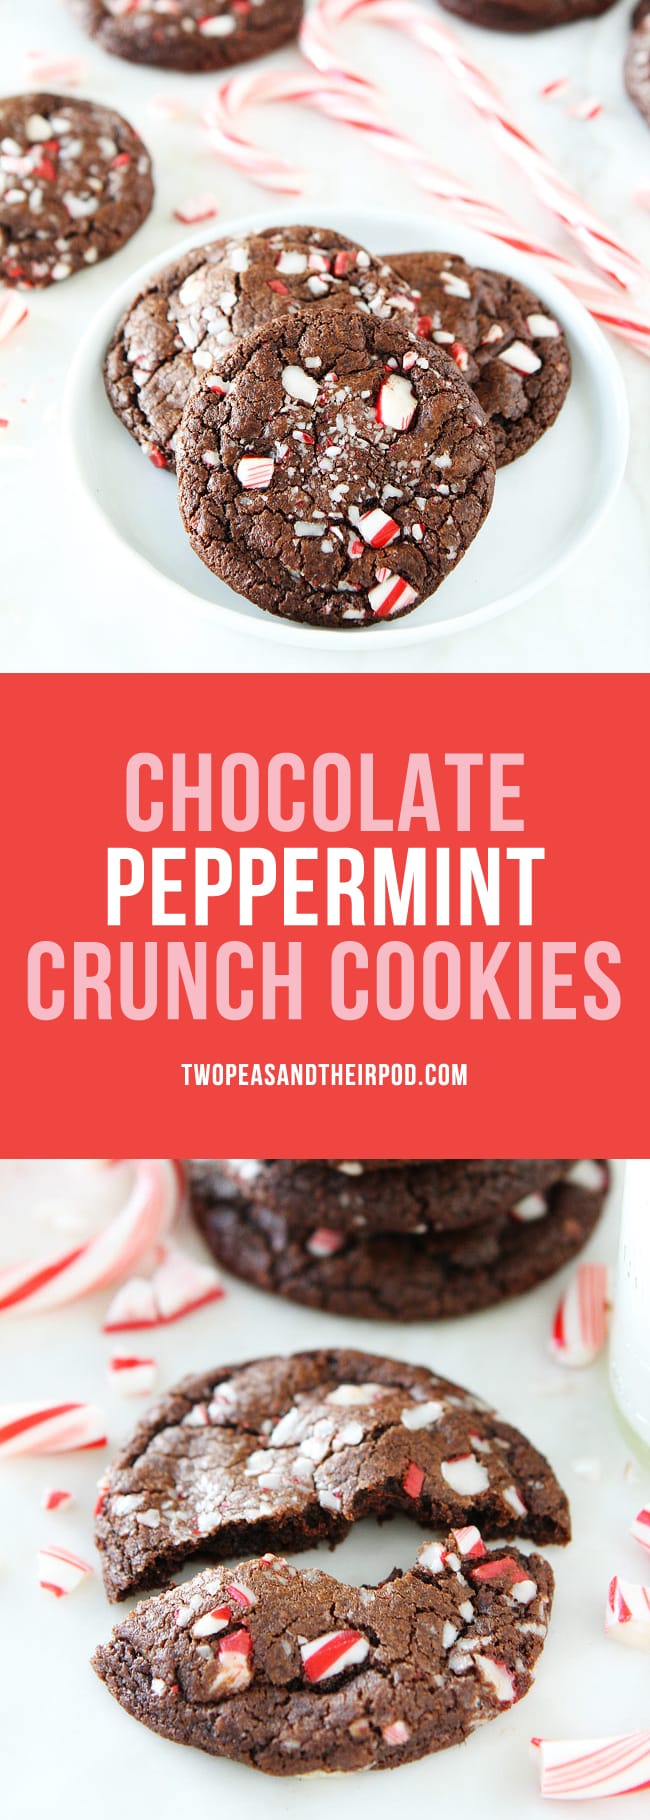 Chocolate Peppermint Crunch Cookies-chocolate cookies with candy cane pieces are the perfect Christmas cookies! #Christmas #cookies #Christmascookies #holidays